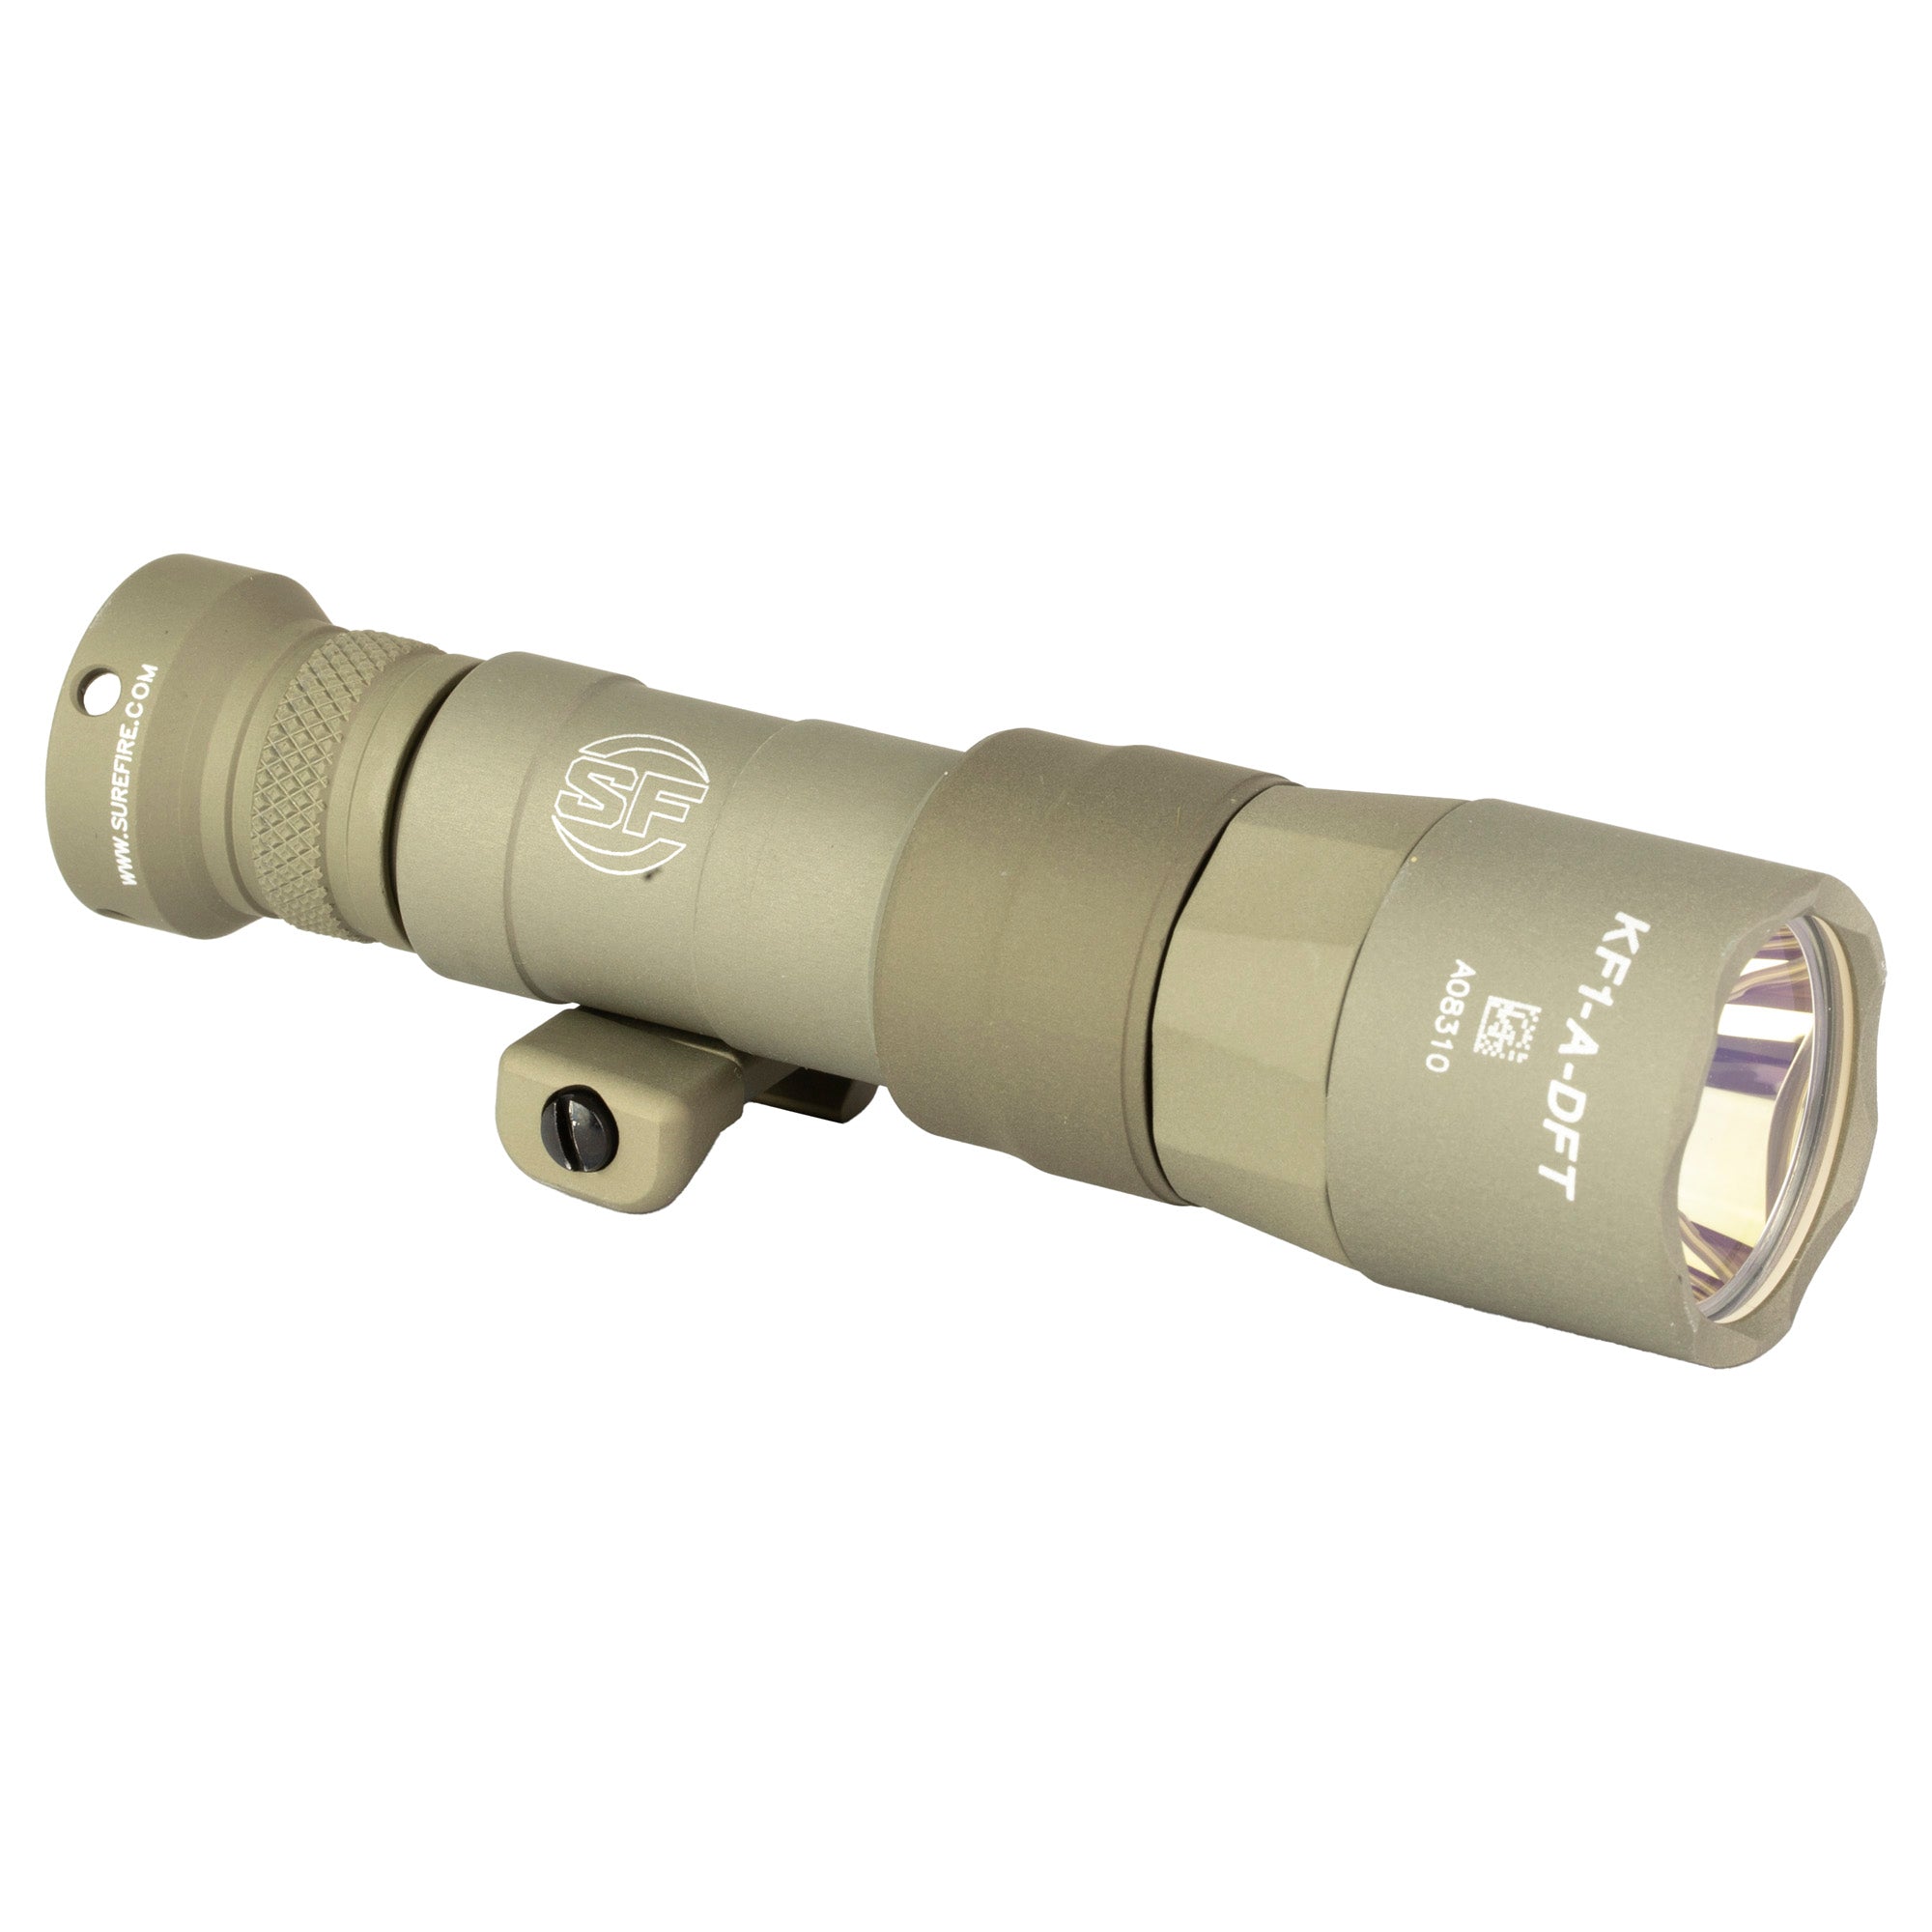 Surefire M340C Turbo Scout Light Pro Flashlight in tan, featuring 500 lumens and dual fuel technology, mounted with an MLOK adapter, and including a Z68 On/Off Tailcap.